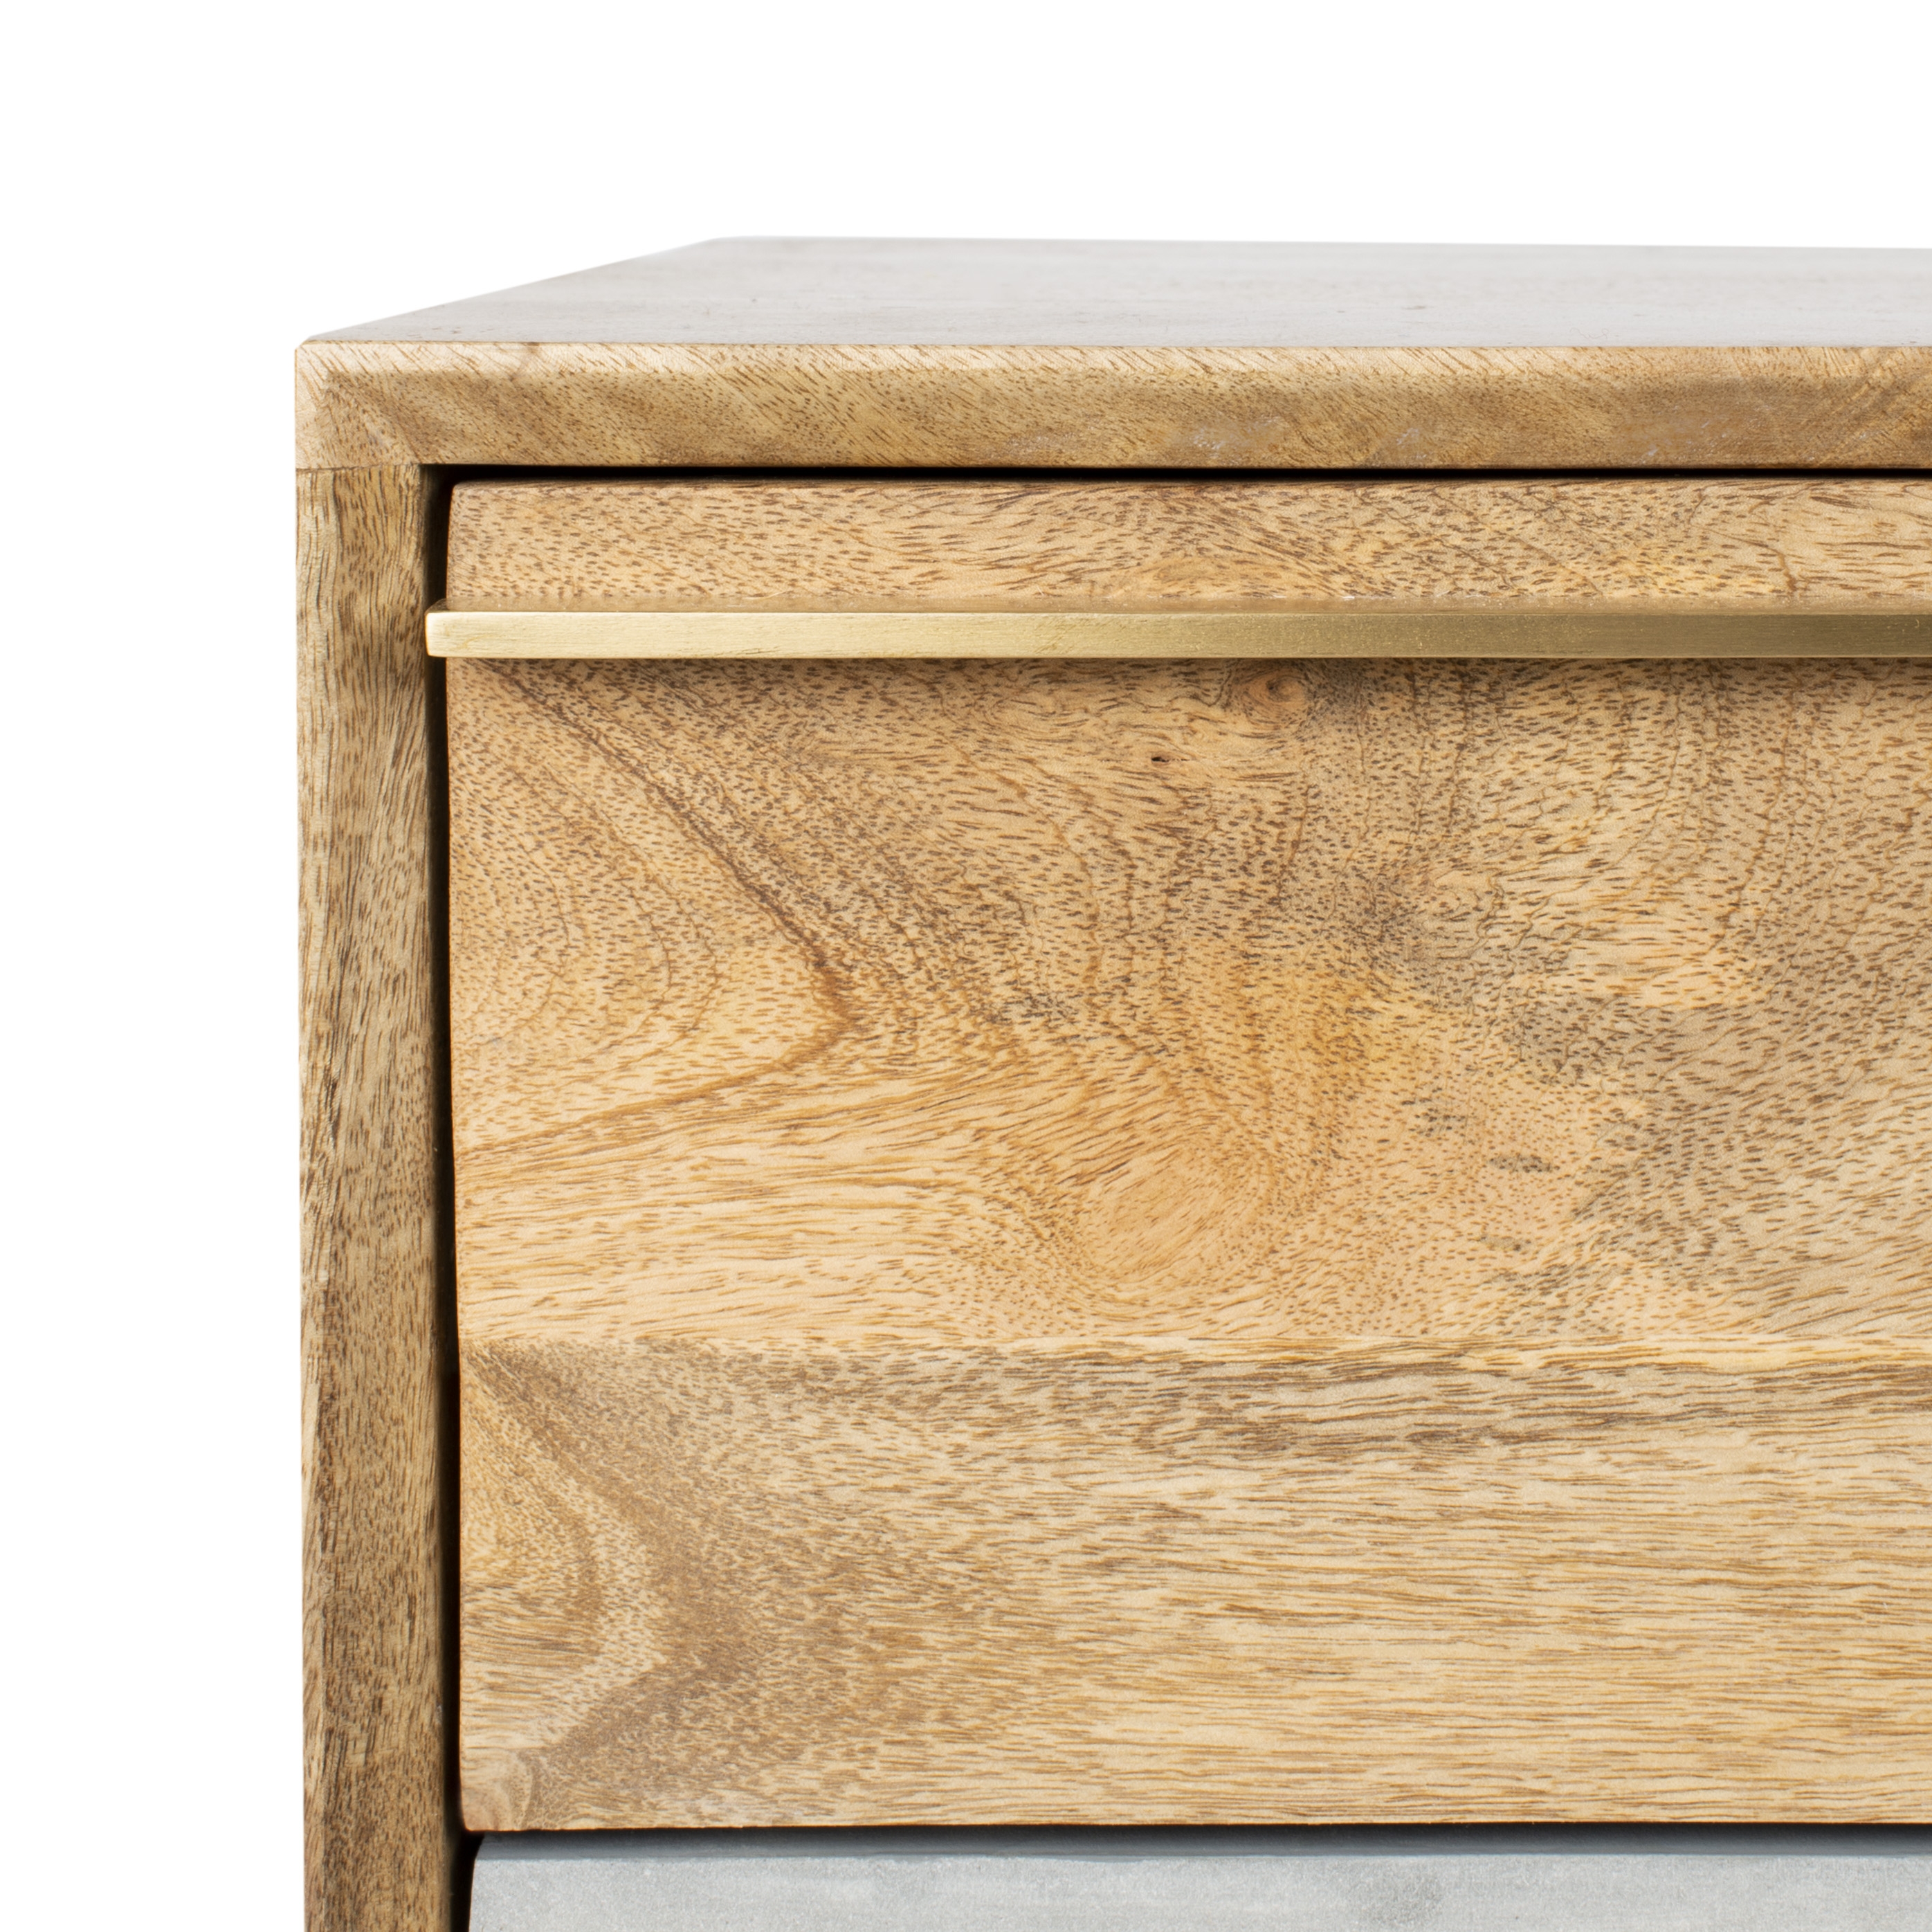 Titan Gold Inlayed Cement Chest - Natural Mango/Brass/Cement - Arlo Home - Image 2